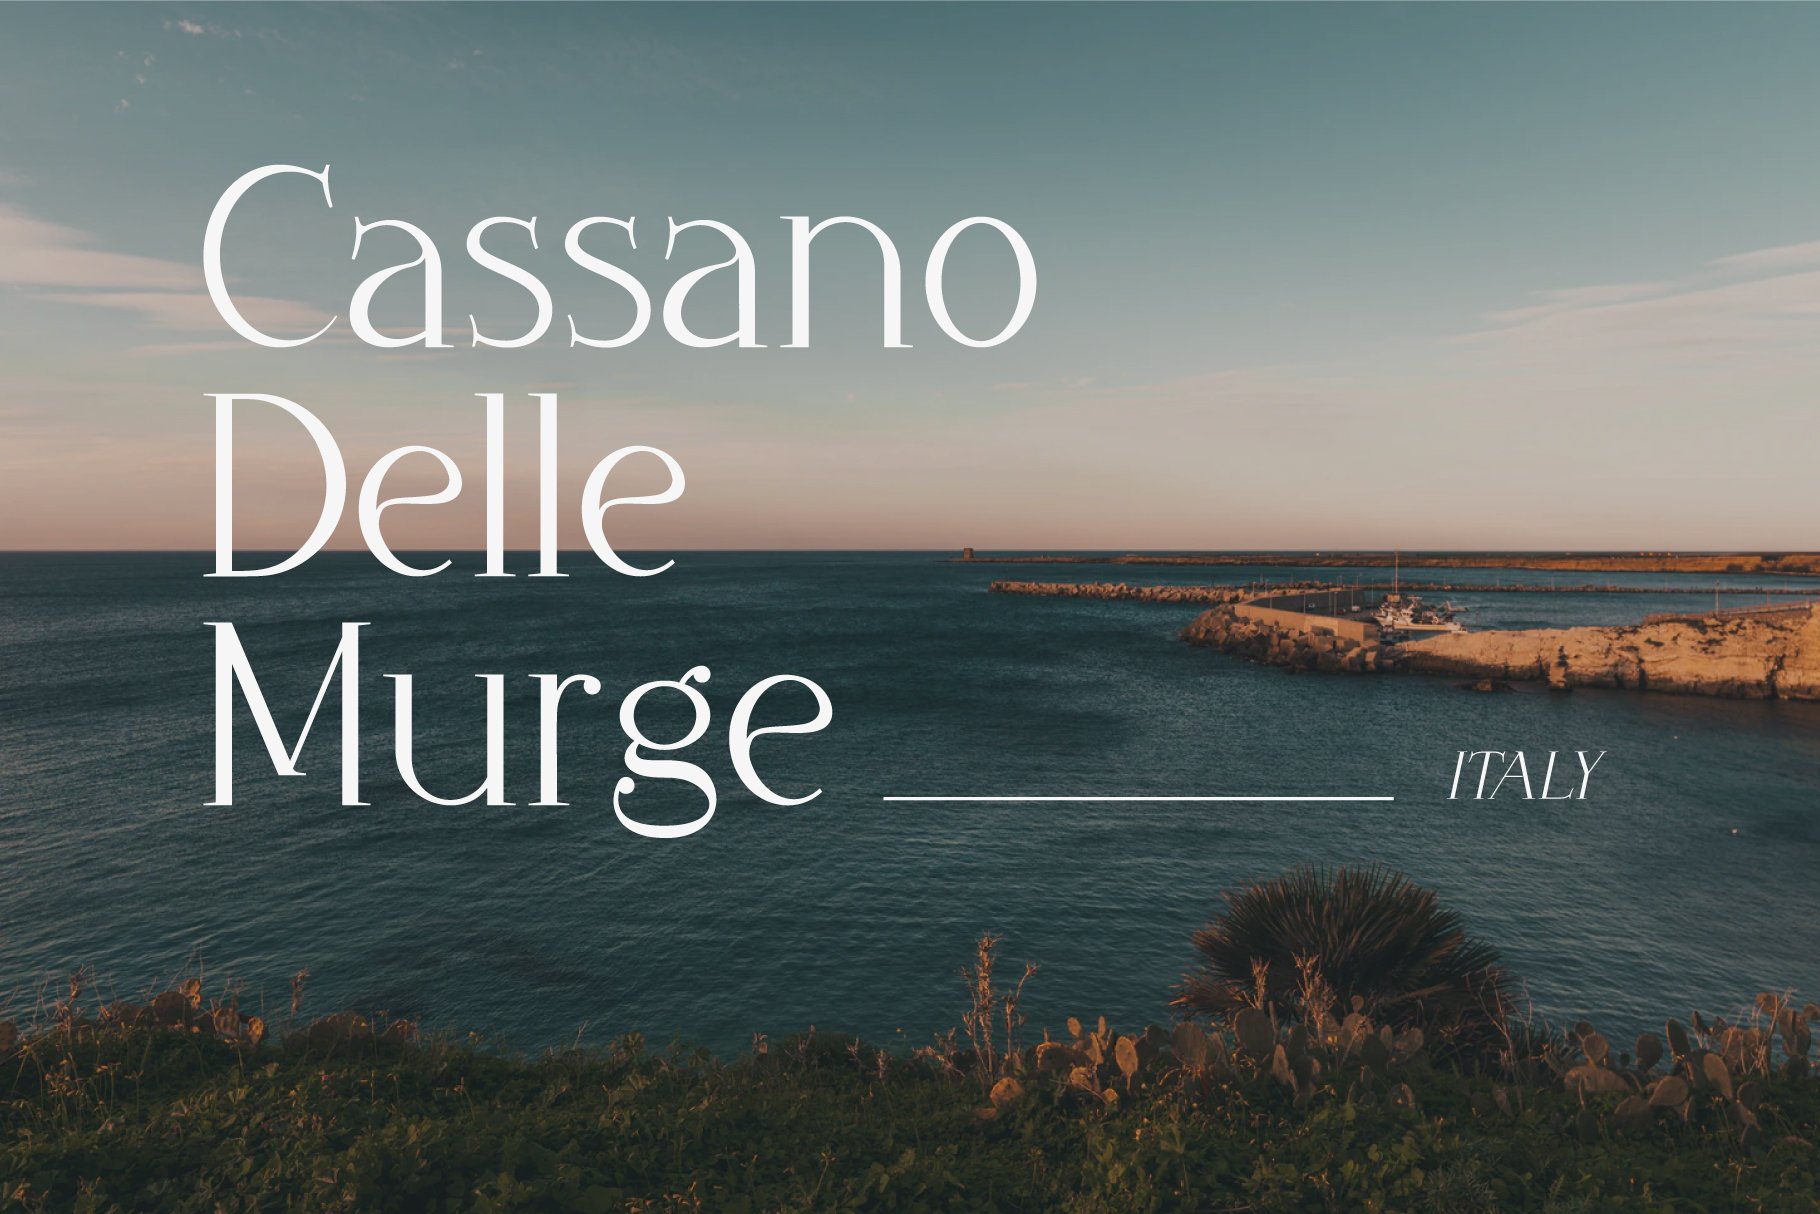 Cassano - Modern Serif Typeface preview image.